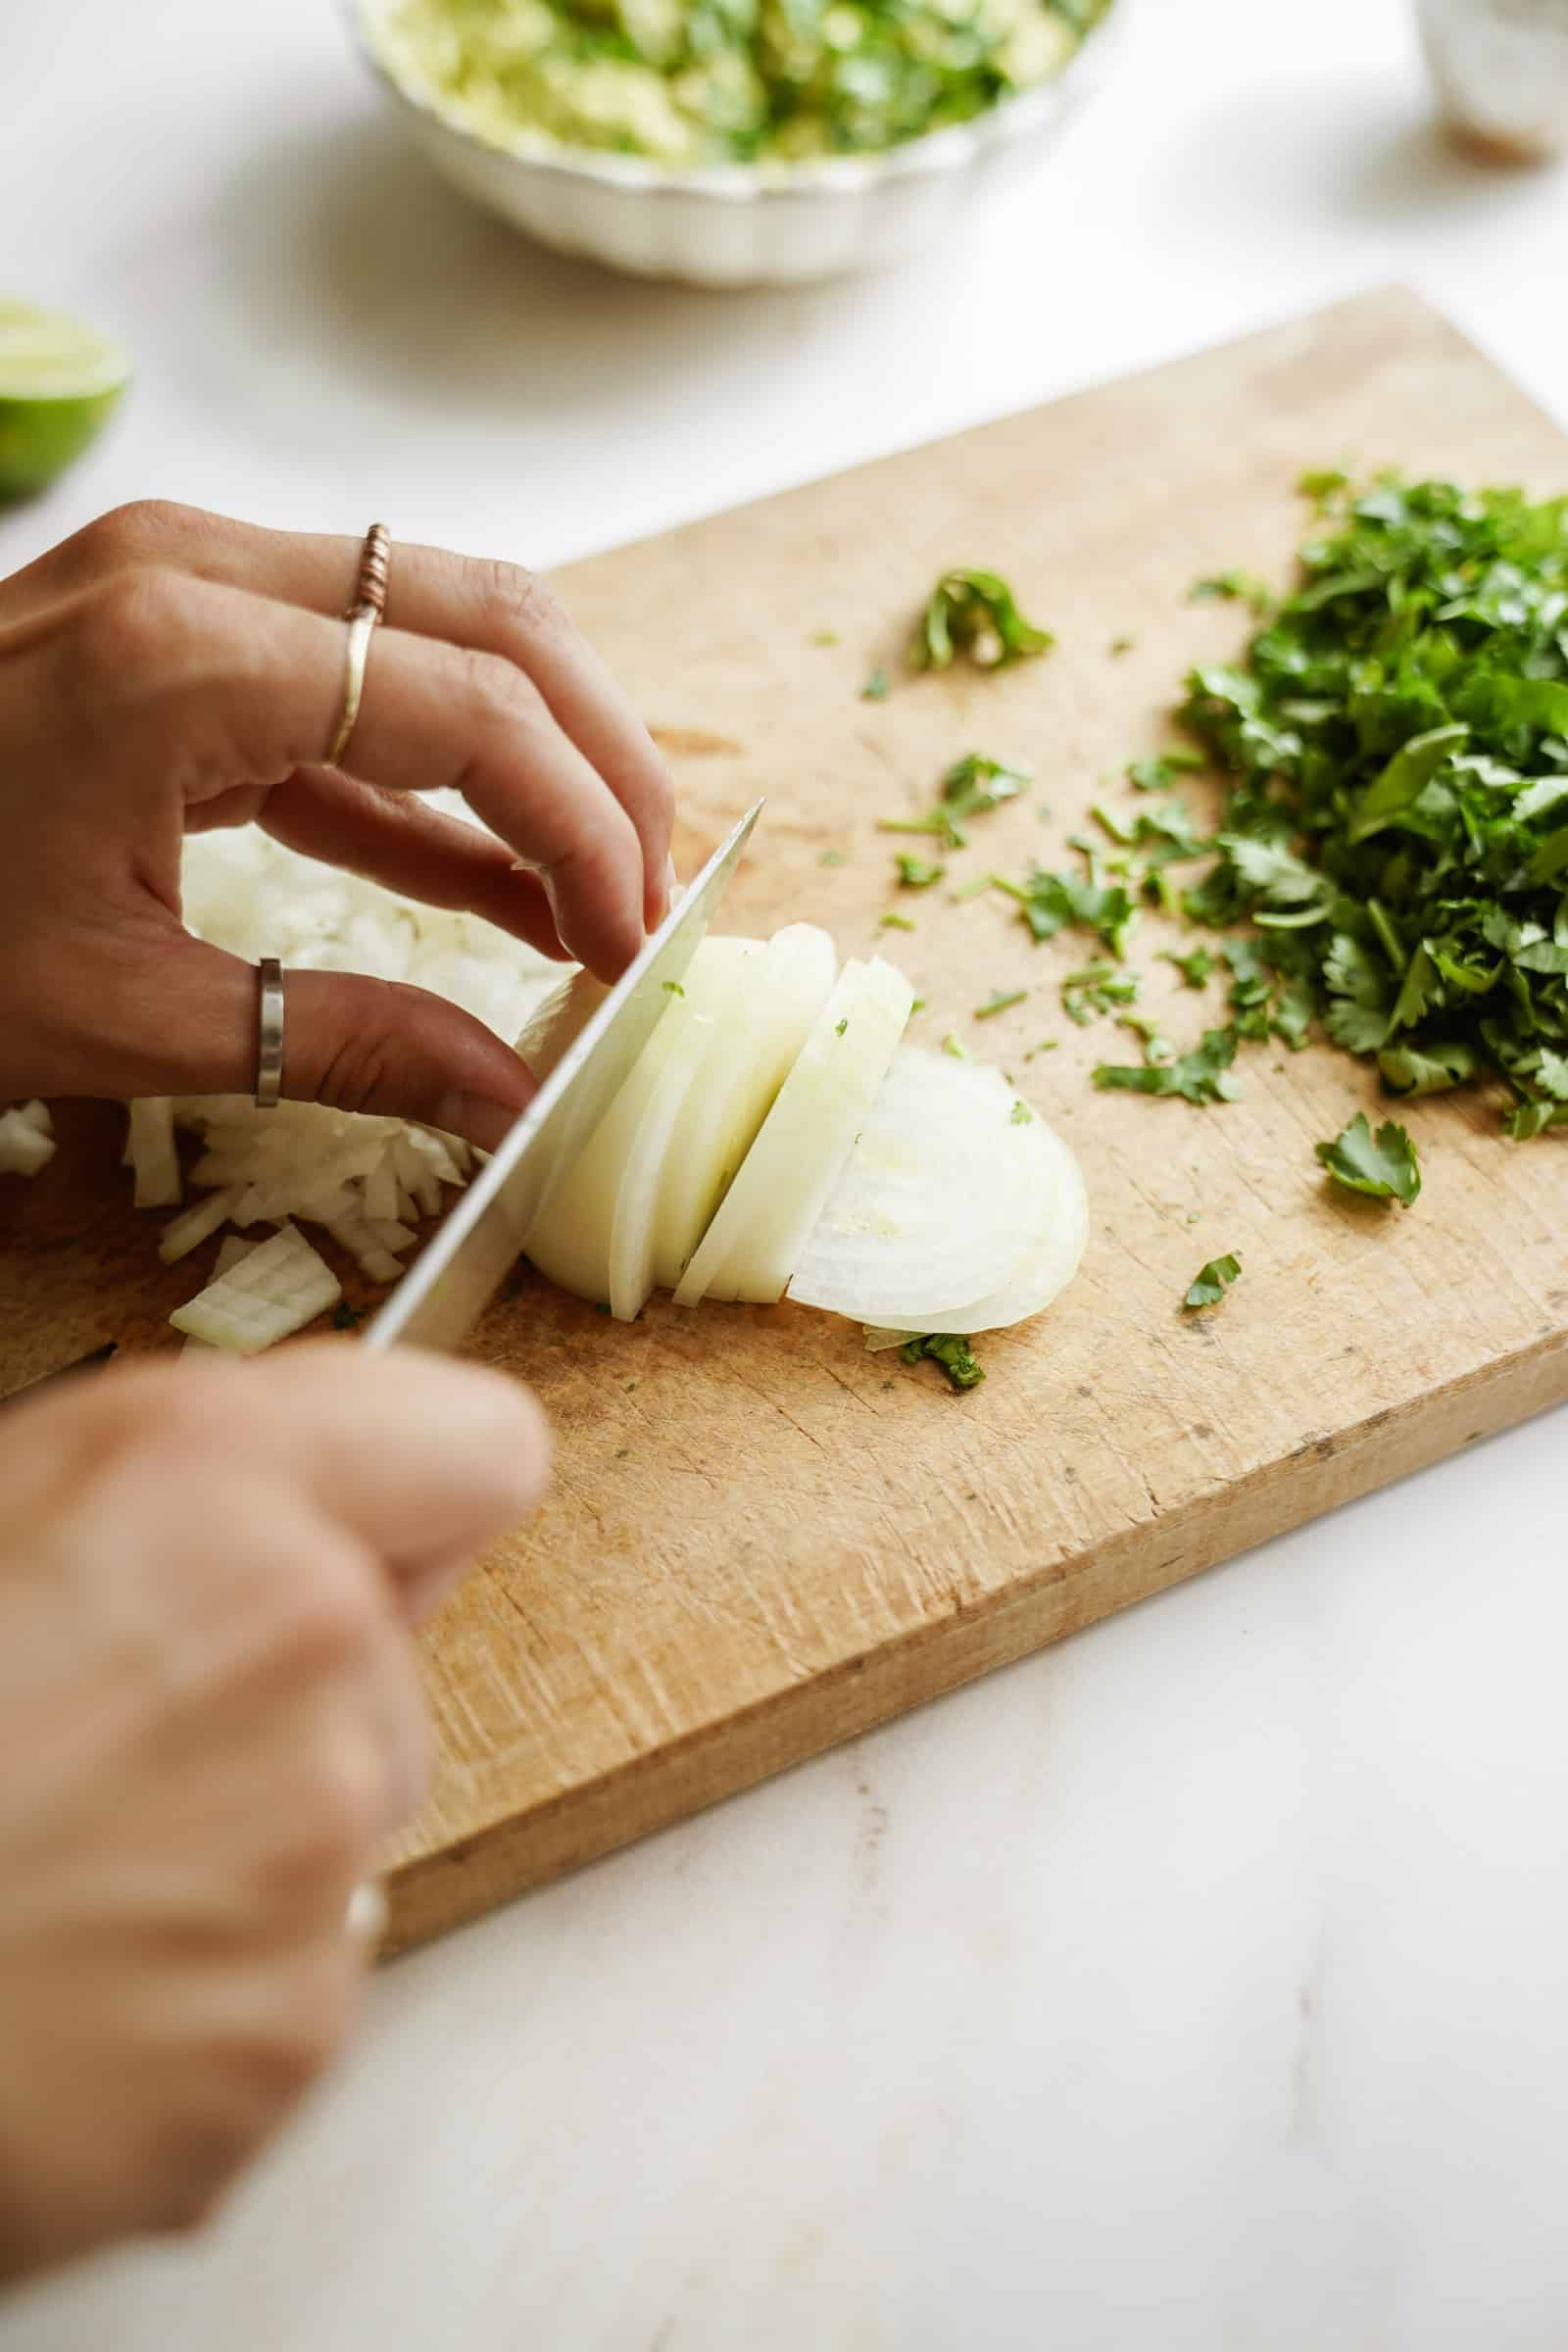 Hand chopping up white onion small on cutting board